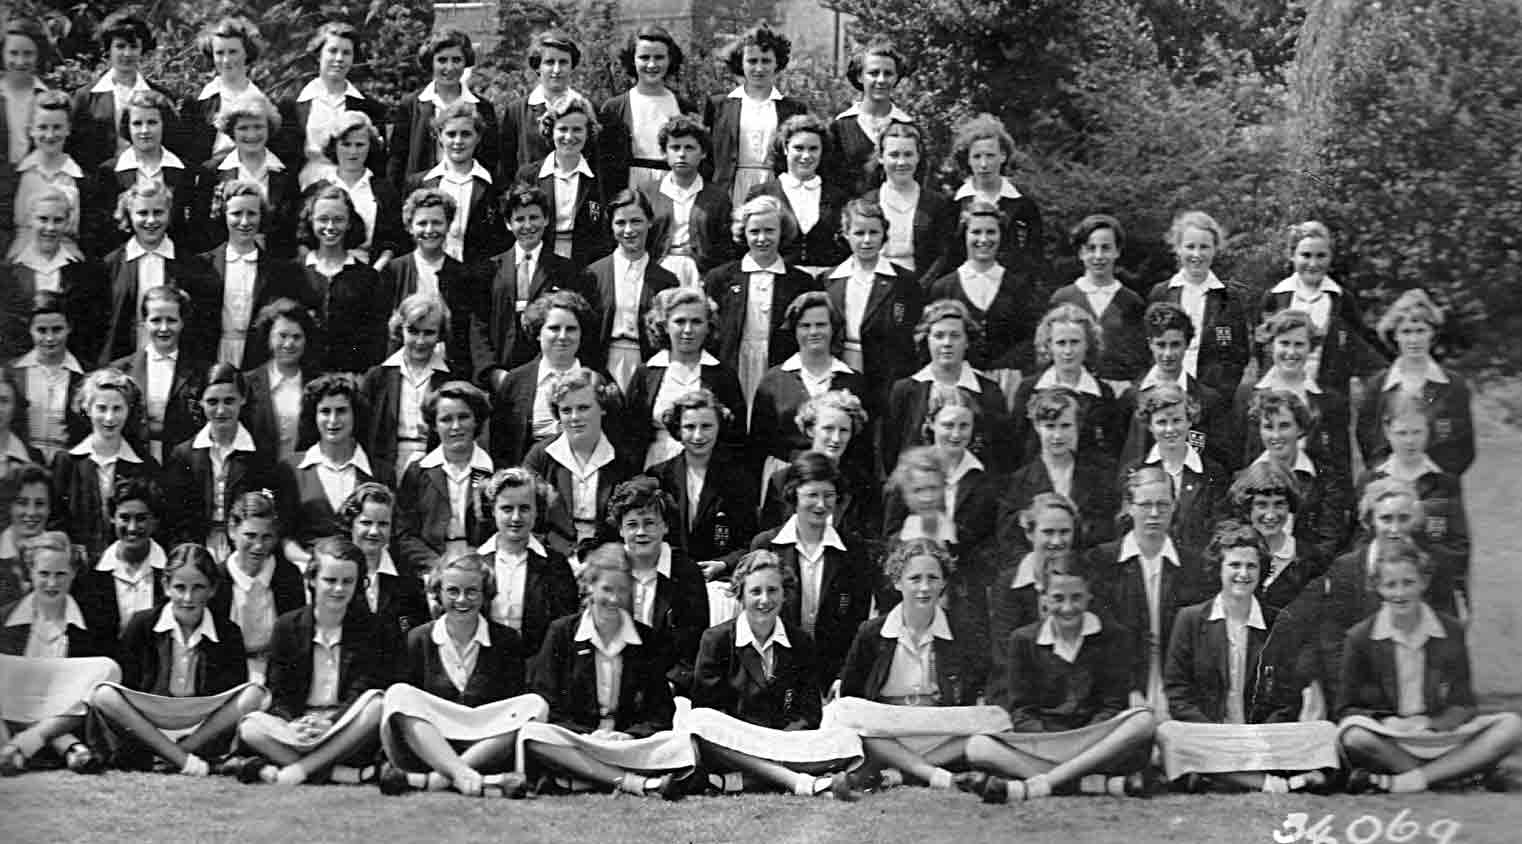 Sixth section of the 1952 school photograph for Copthall County Grammar School